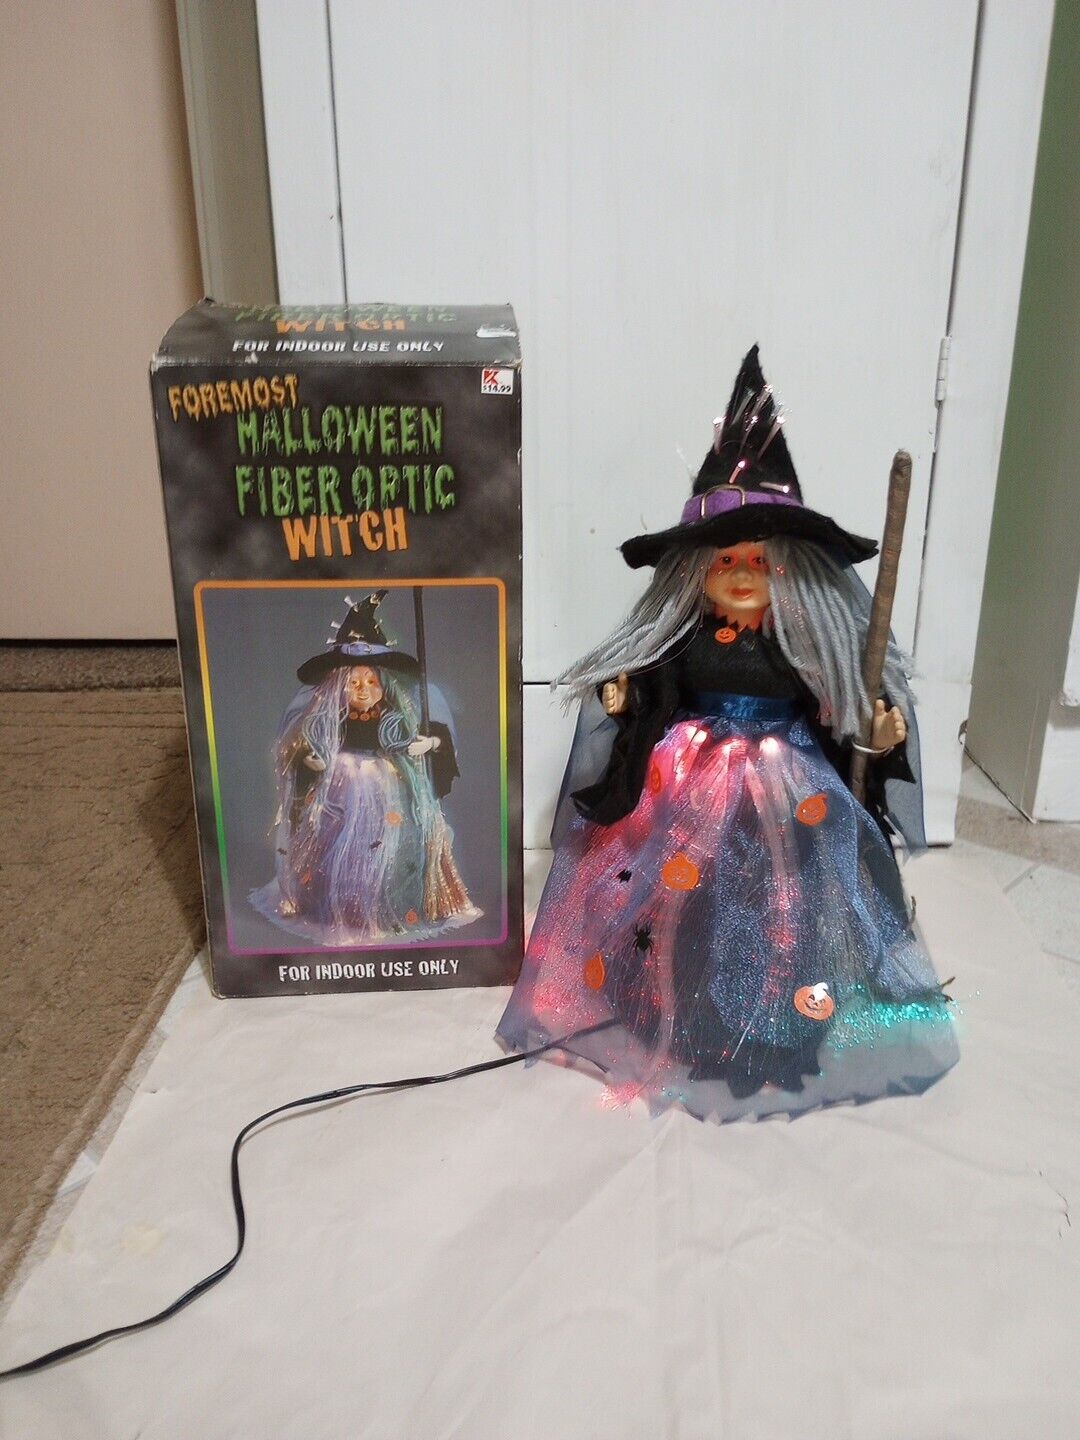 Vintage 90s Kmart Halloween Fall Fiber Optic Changing Doll Witch Broom Barbie?